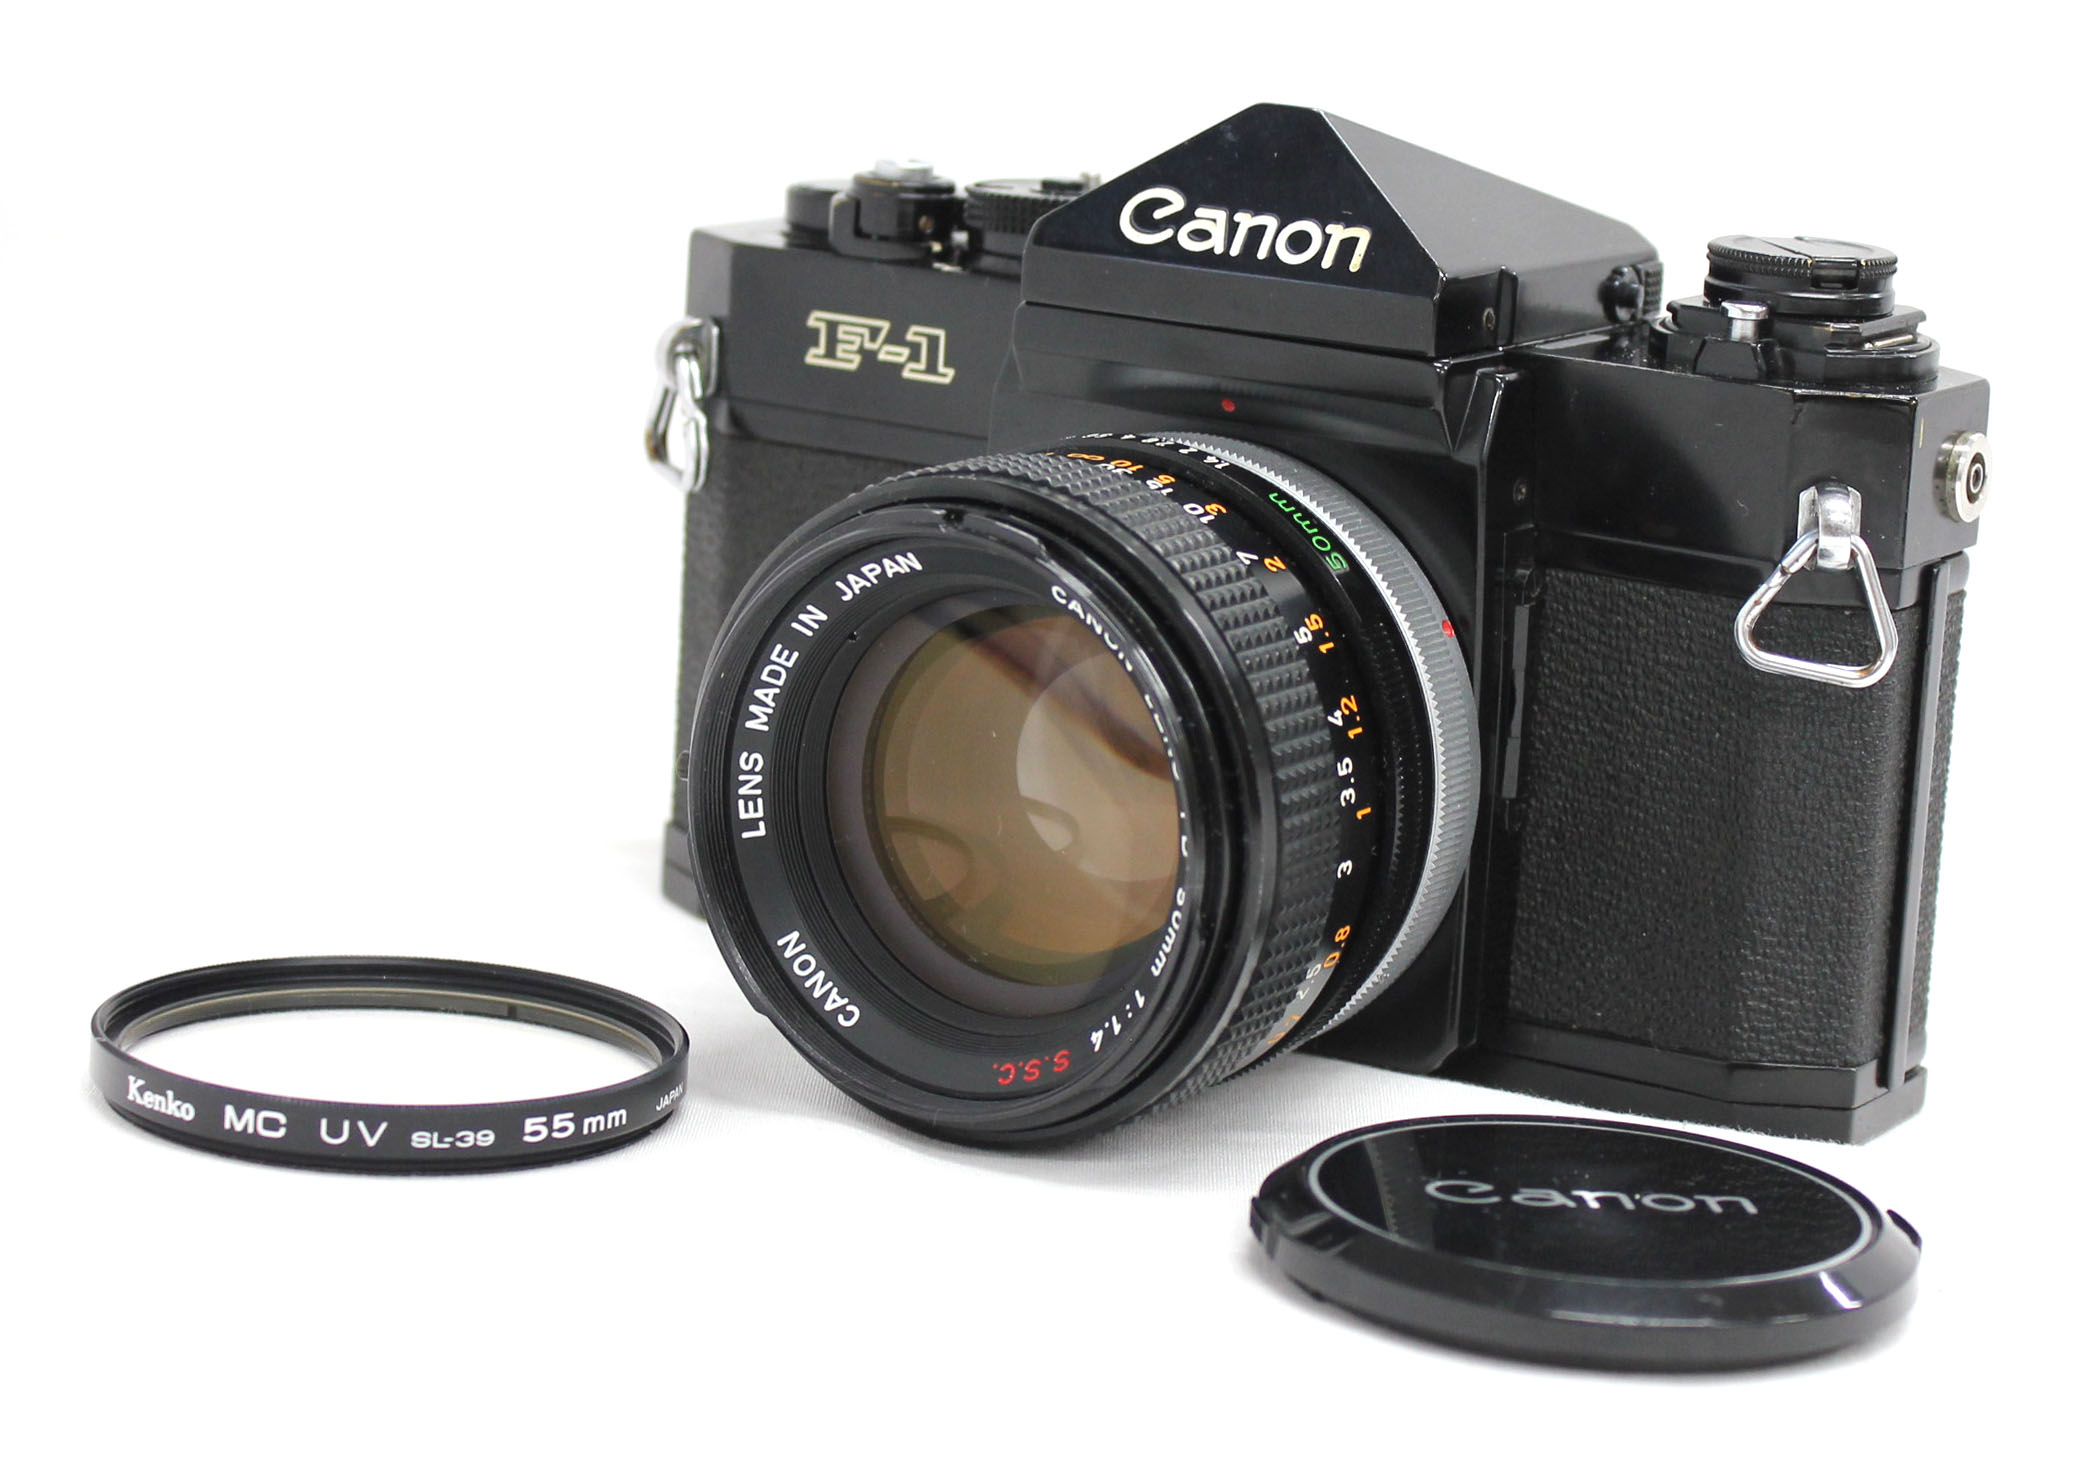  Canon F-1 35mm SLR Film Camera with FD 50mm F/1.4 S.S.C. Lens from Japan Photo 0